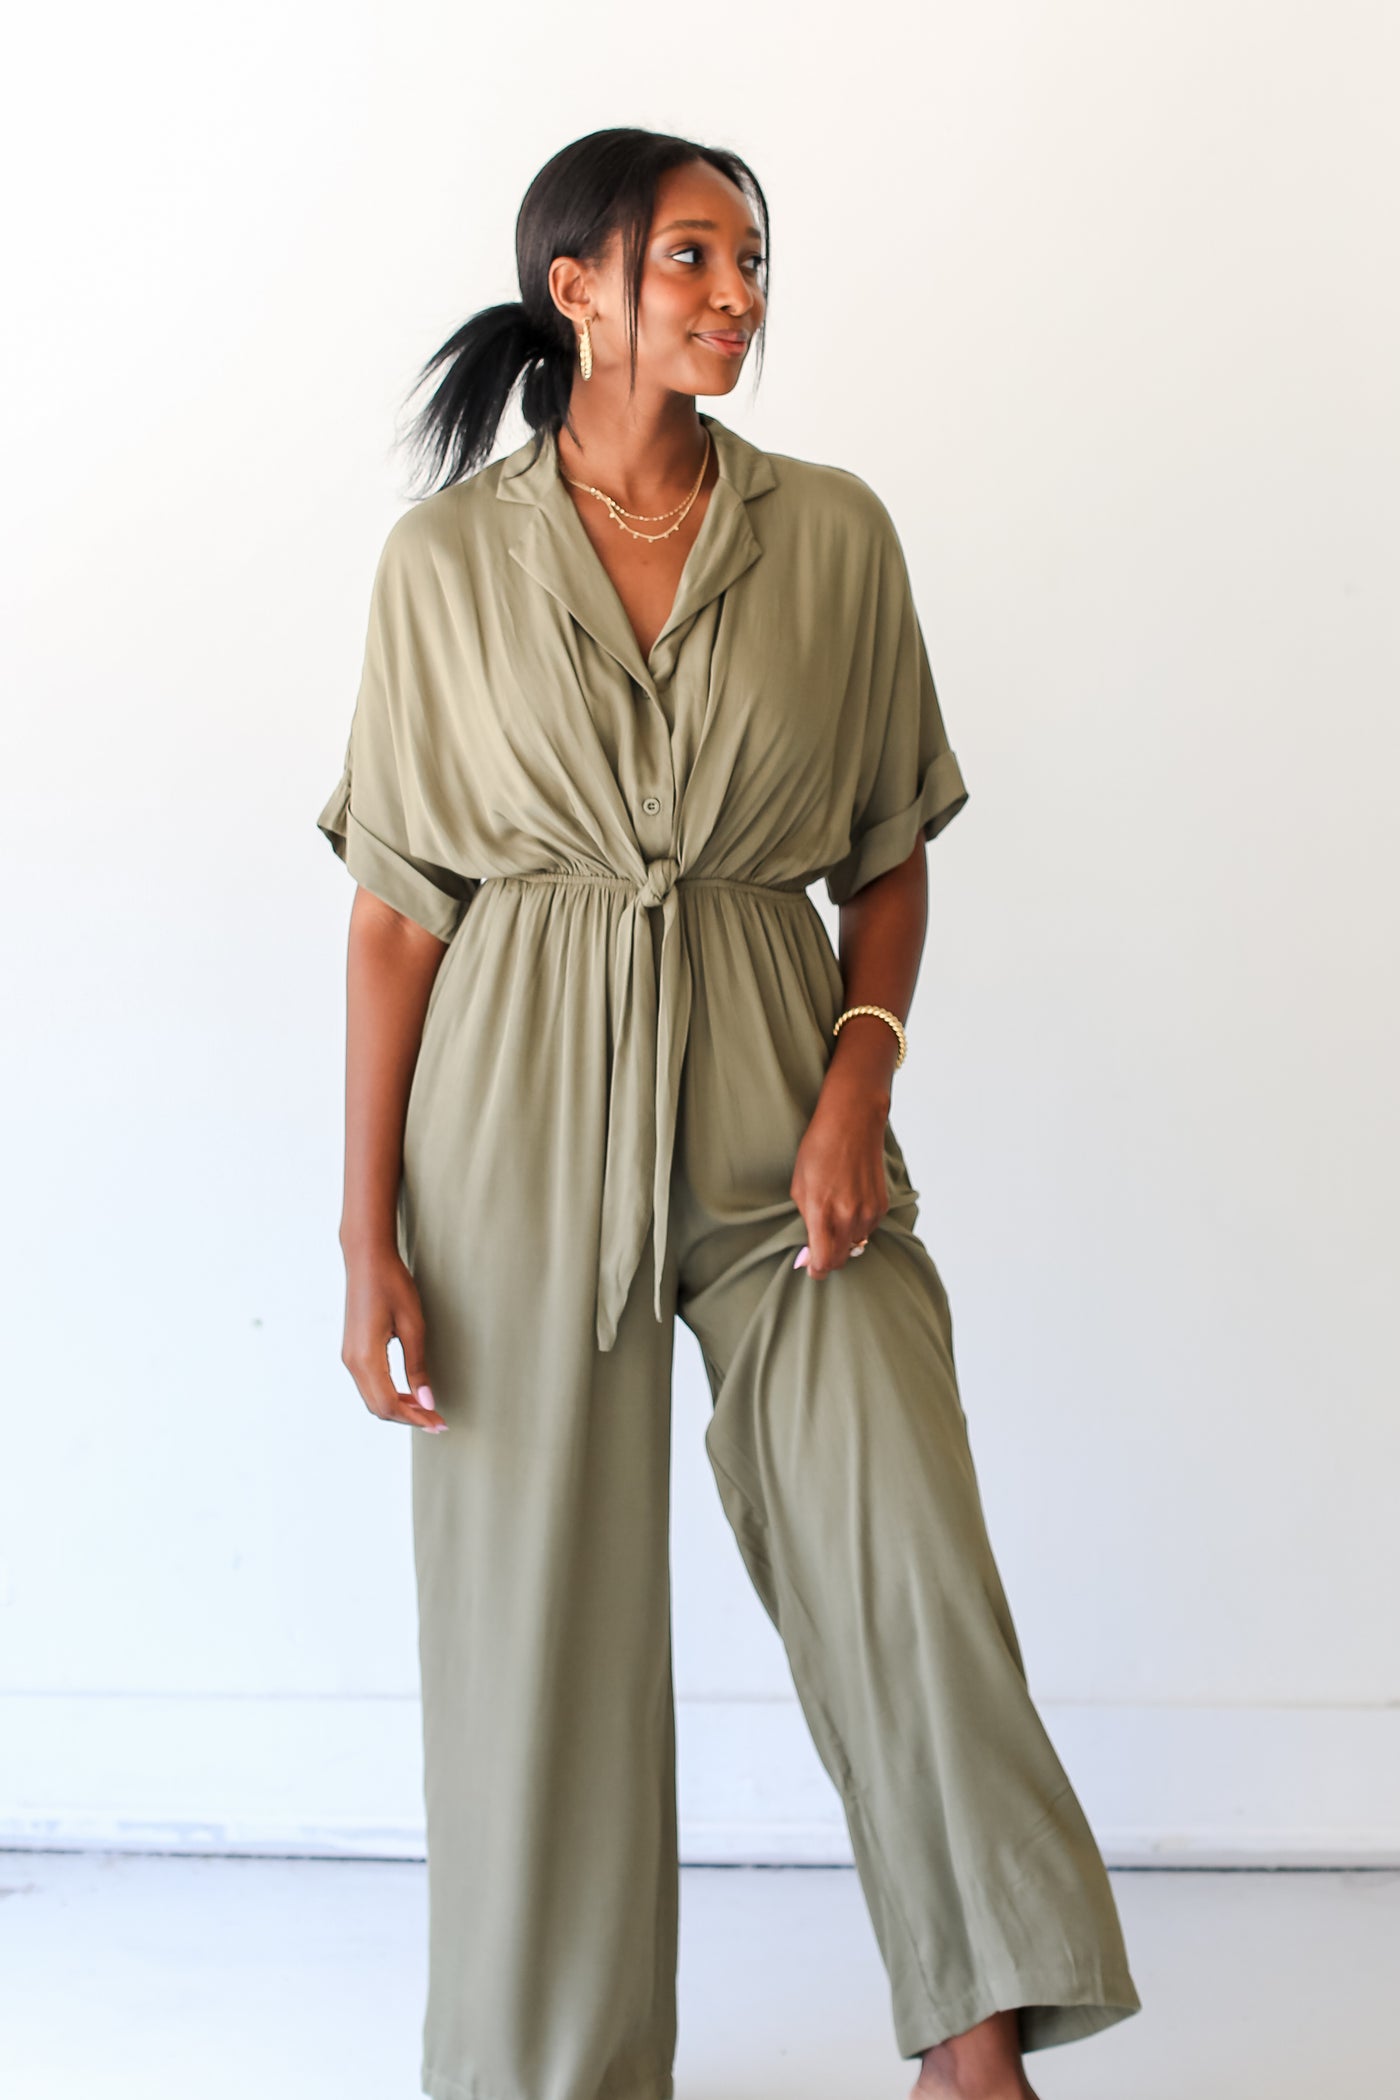 model wearing an olive Collared Jumpsuit